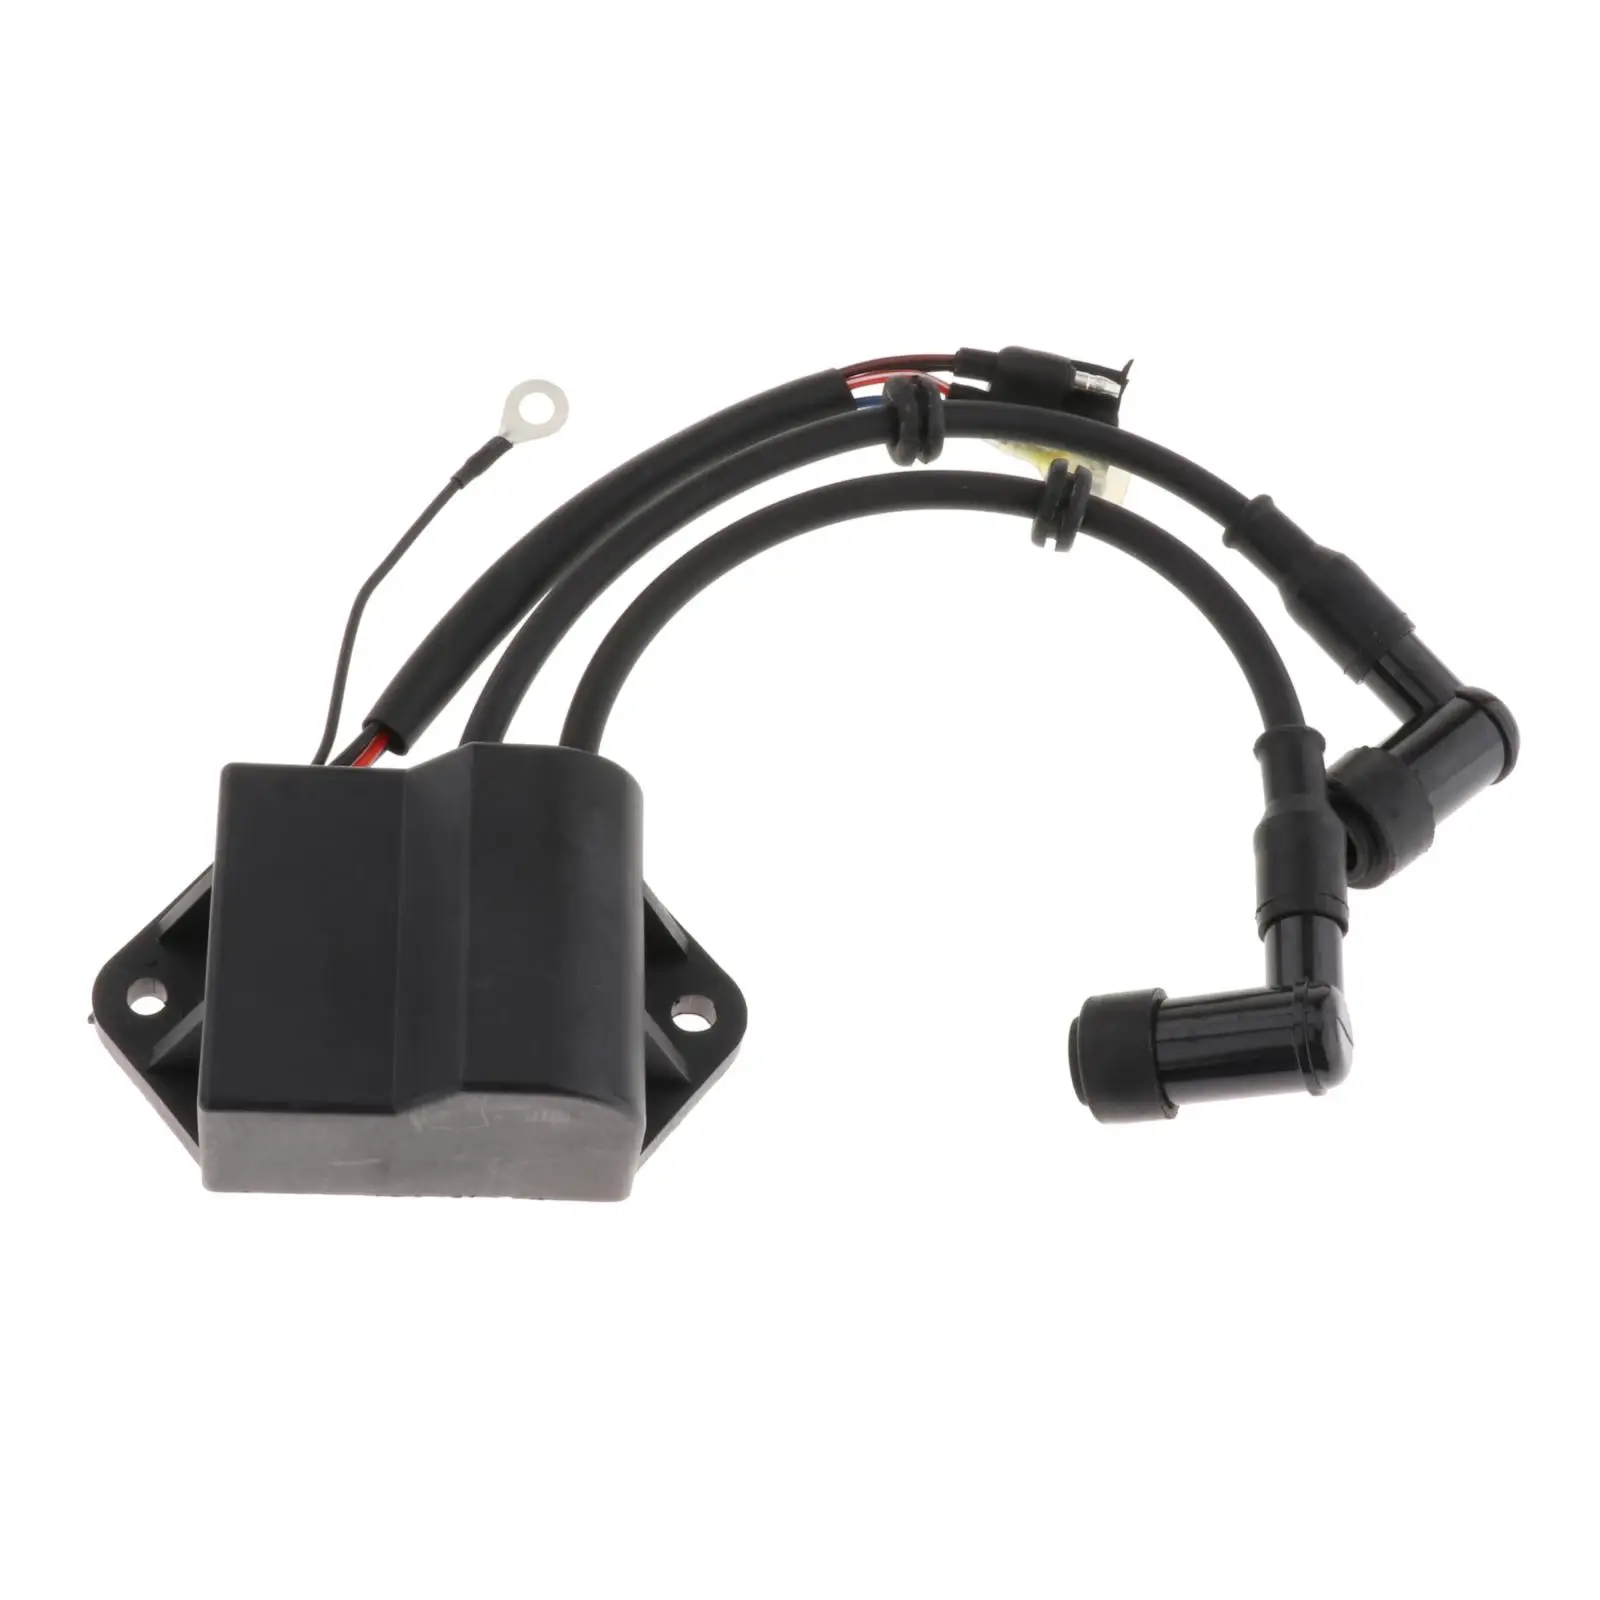 Electric Motor CDI Unit CDI Coil Assy Fit for Suzuki Outboard 2 Stroke Engine Motor DT6 DT8 32900-98101 Replacement Parts